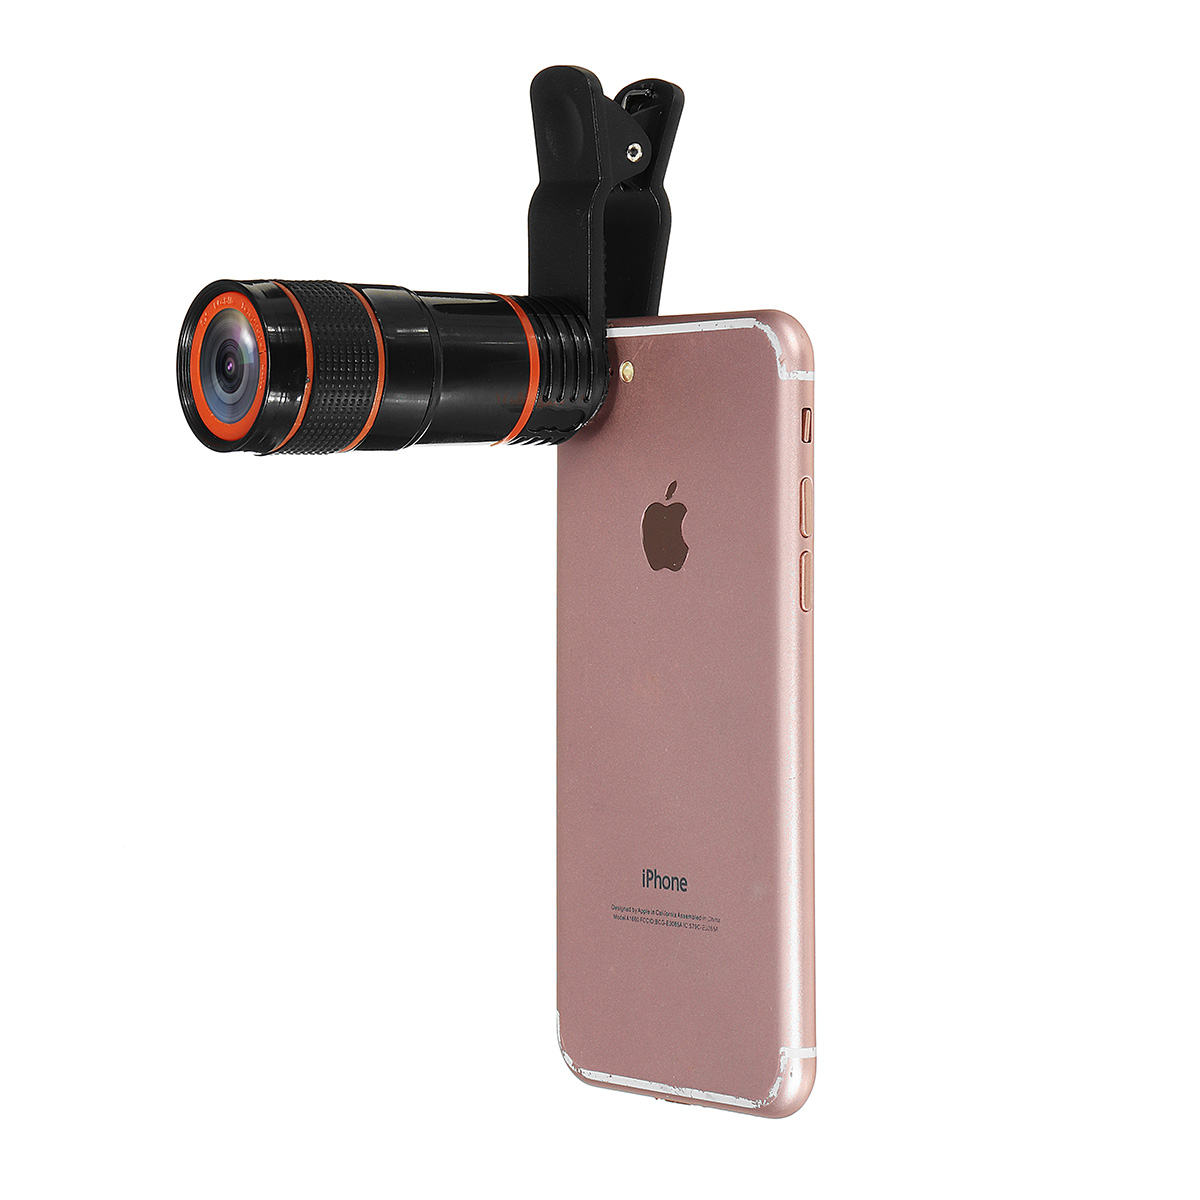 Find All in 1 Phone Camera Lens 8X Telescope Selfie Stick Tripod bluetooth Remote Kit for Sale on Gipsybee.com with cryptocurrencies